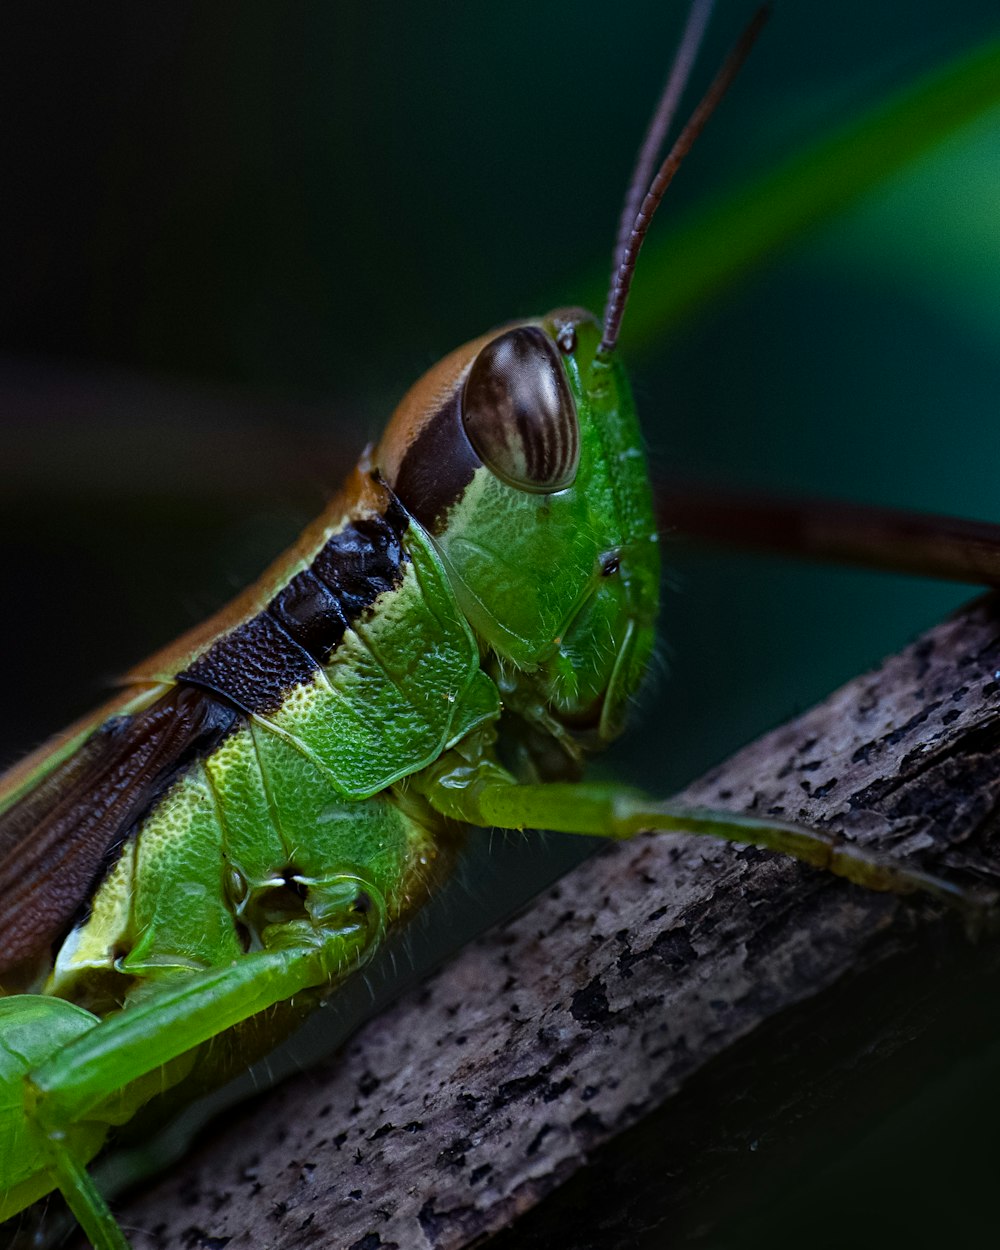 a close up of a green insect on a branch